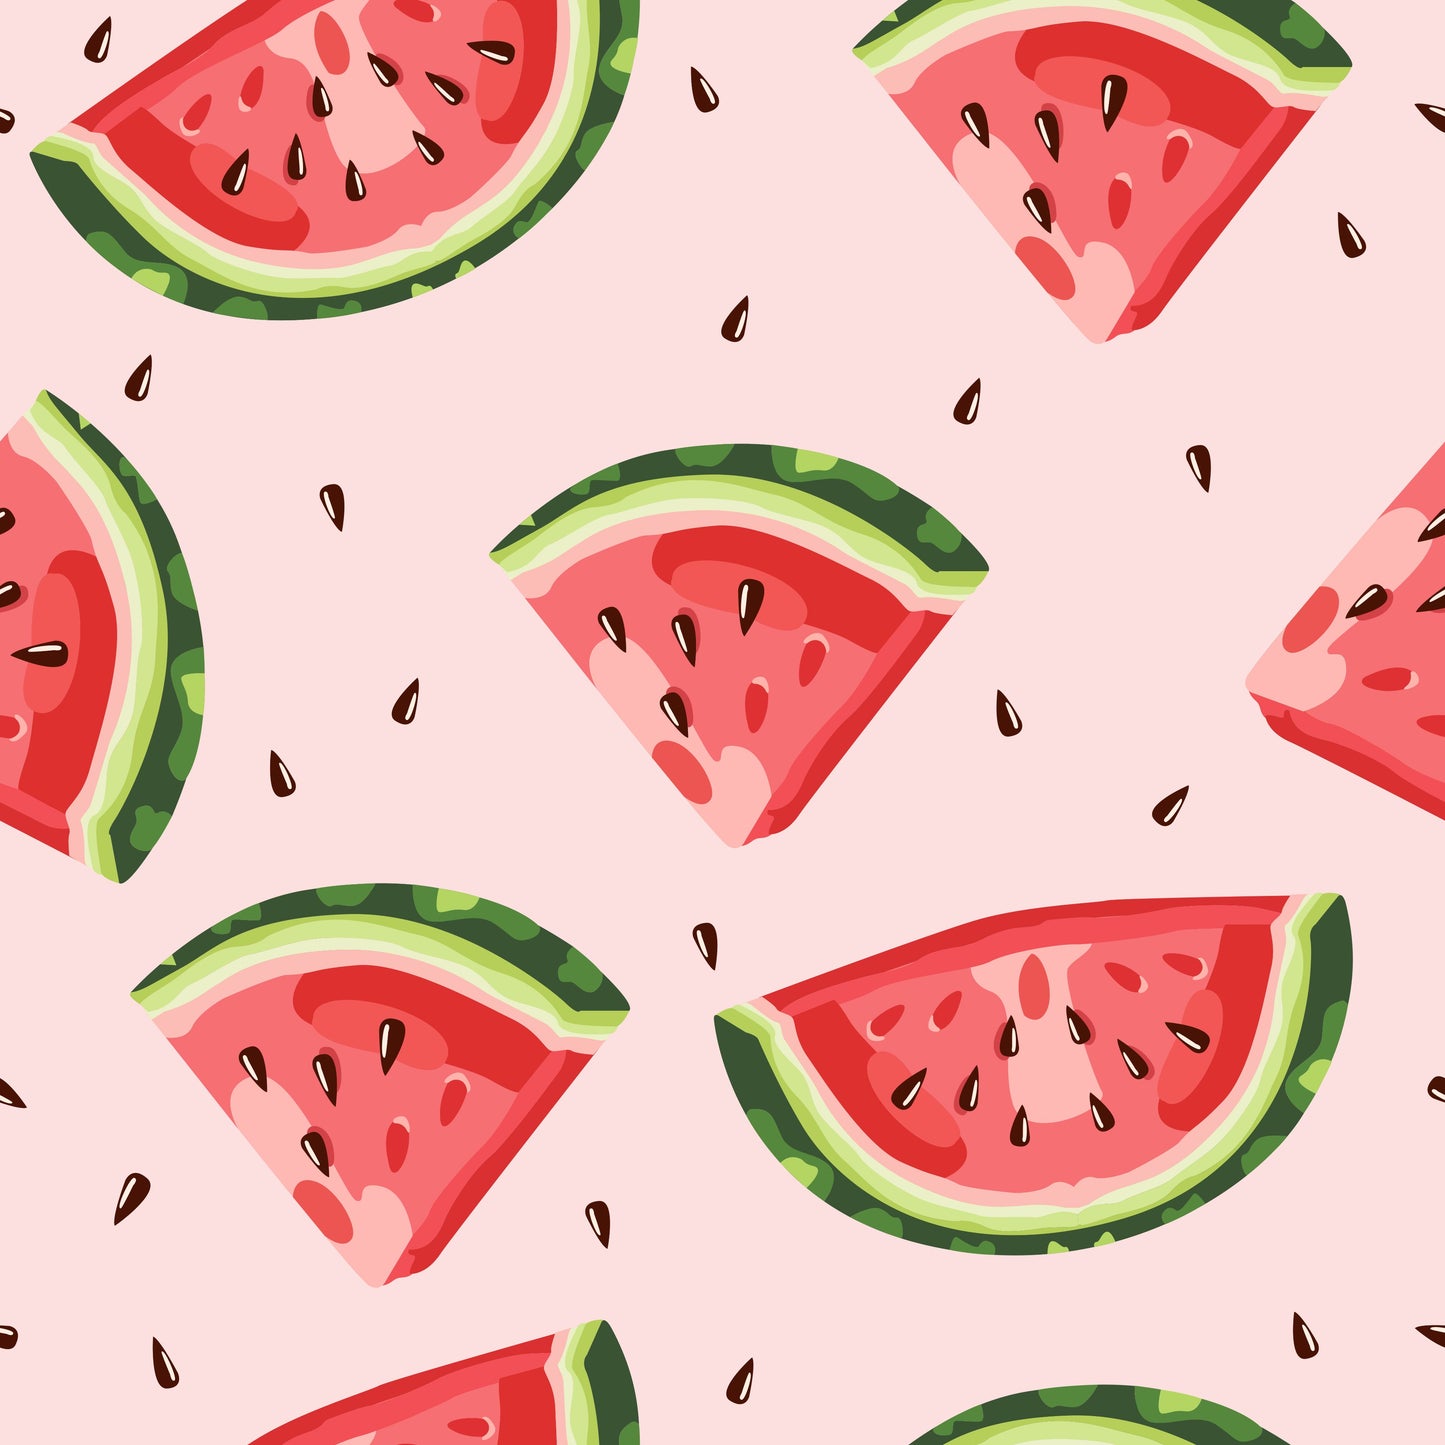 Watermelon (Faux Leather - 8" x 13" Printed Sheet)